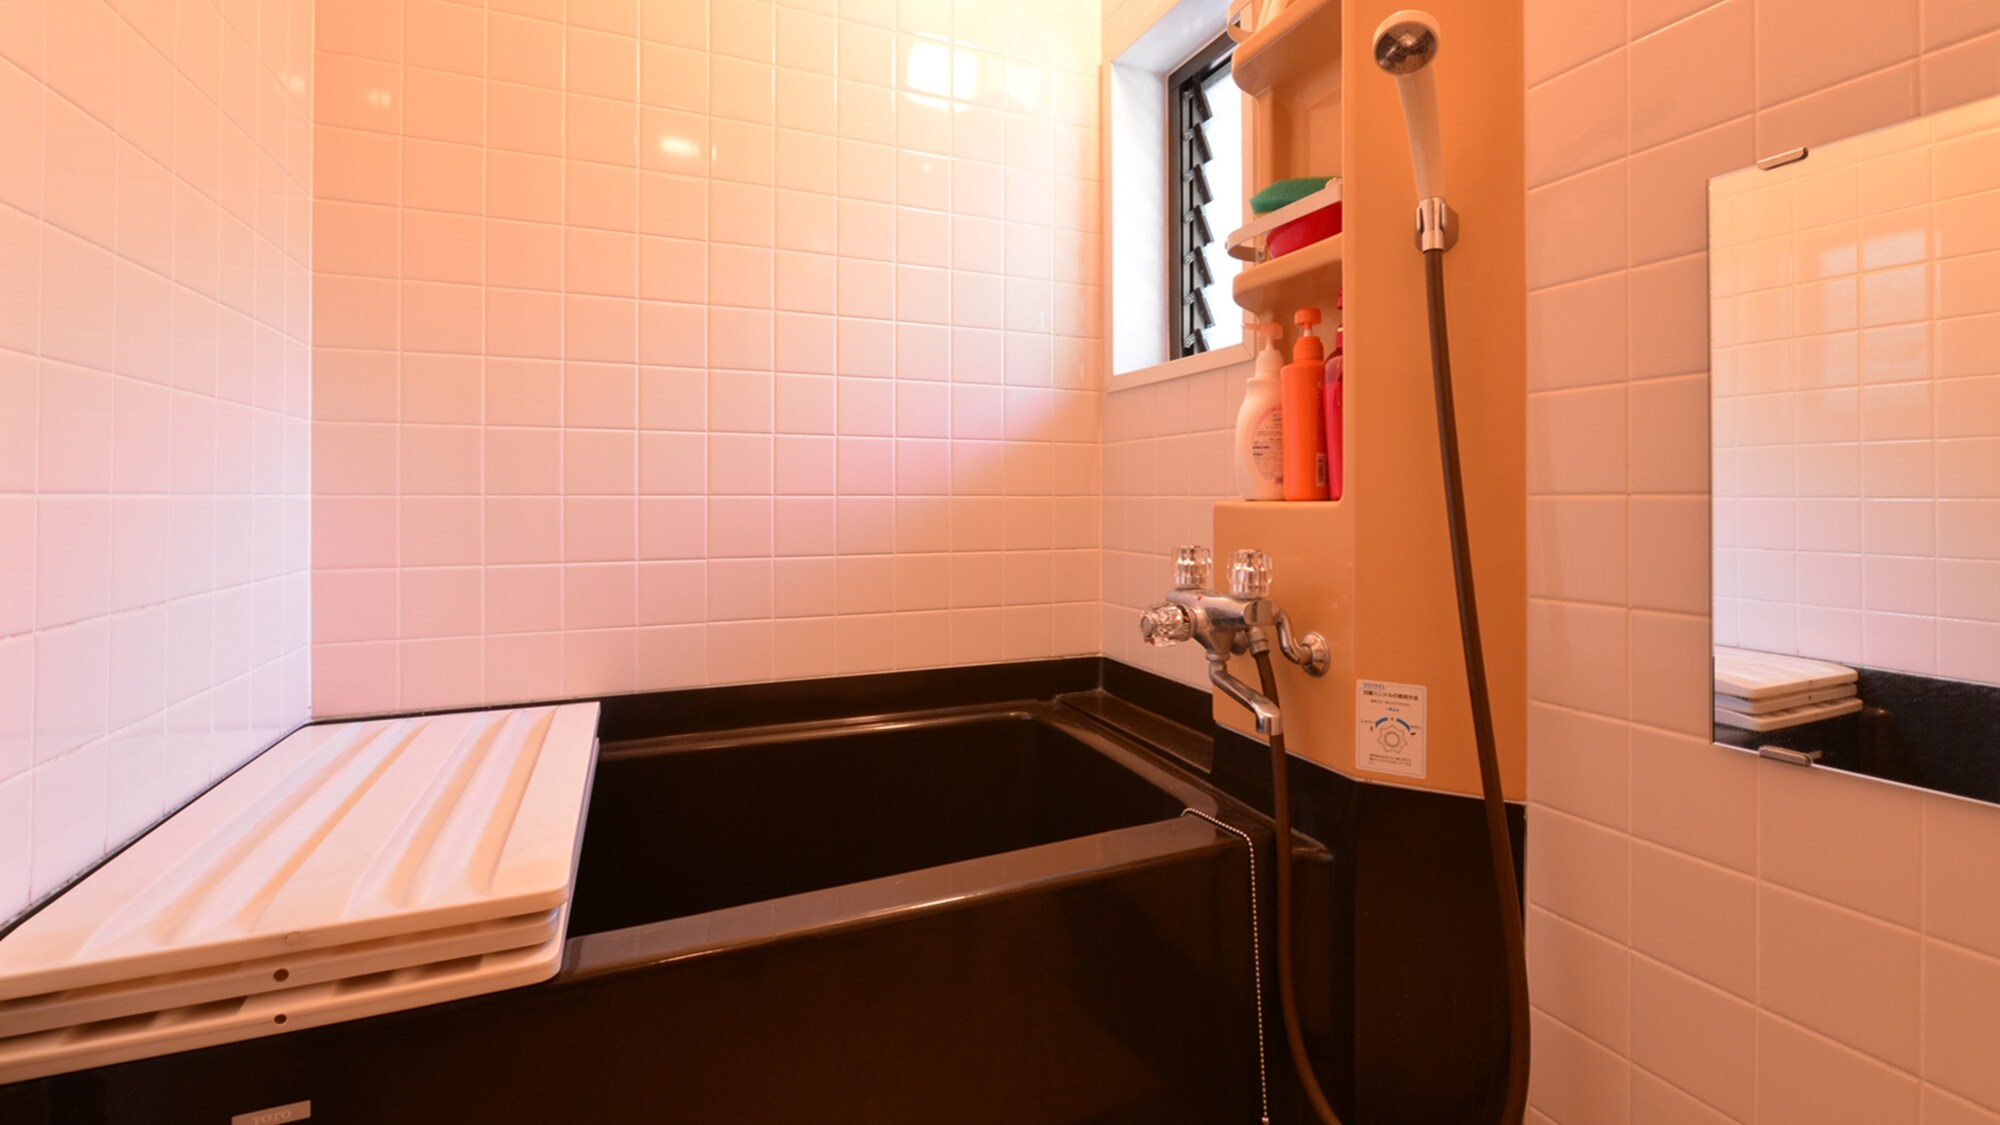 * Japanese-style room (example of guest room) / bathroom is fully equipped.